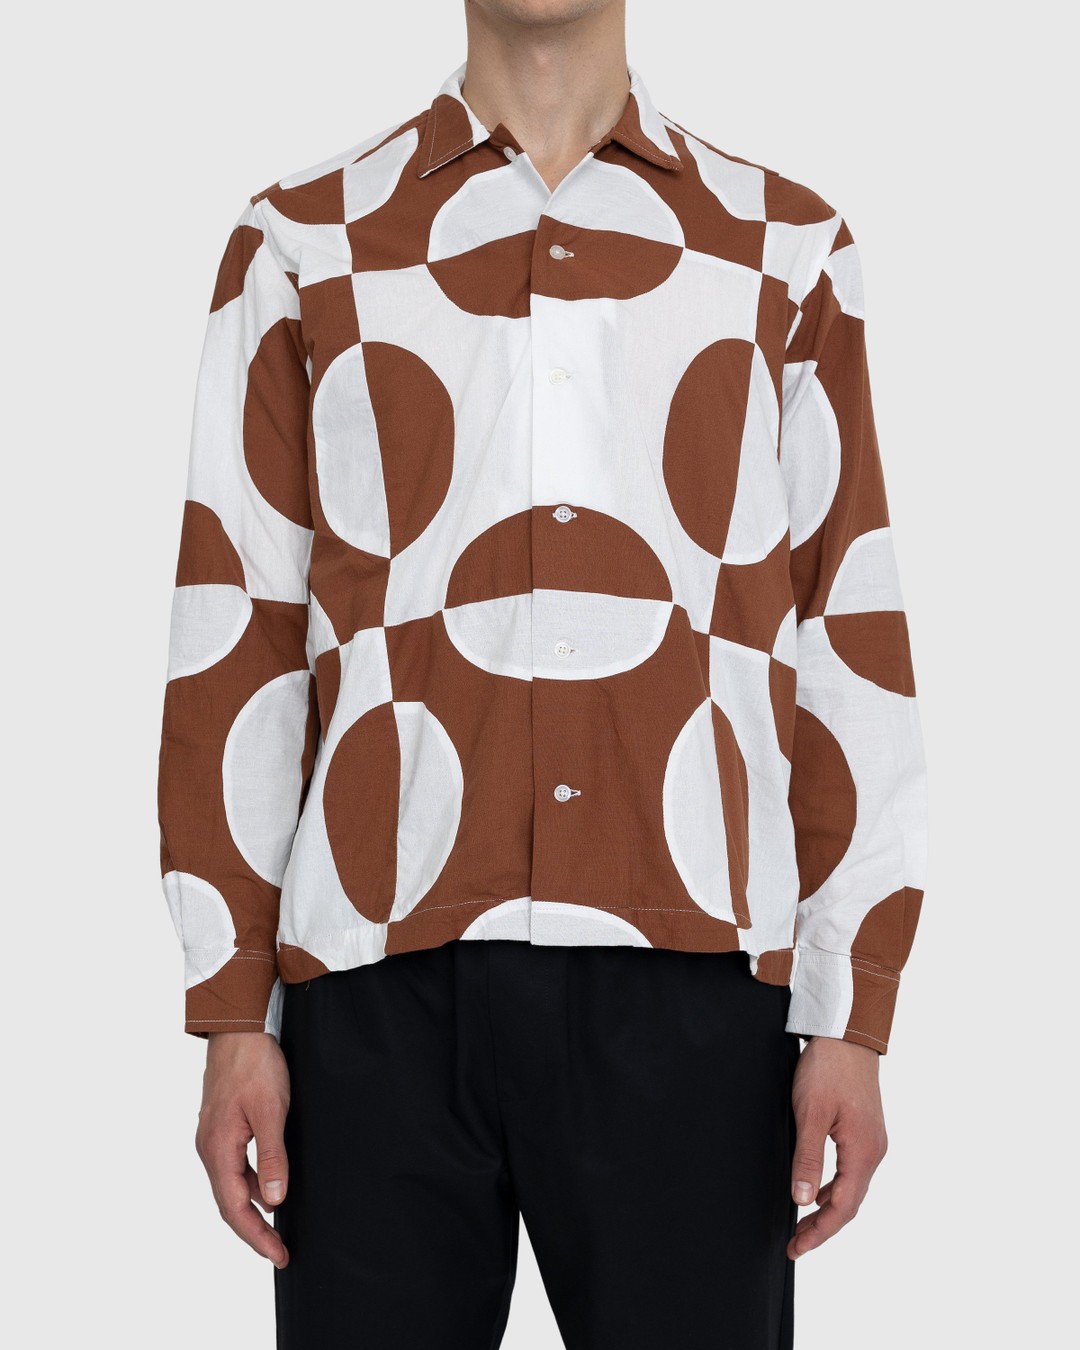 bode – Duo Oval Patchwork Long-Sleeve Shirt Brown - Shirts - Multi - Image 2